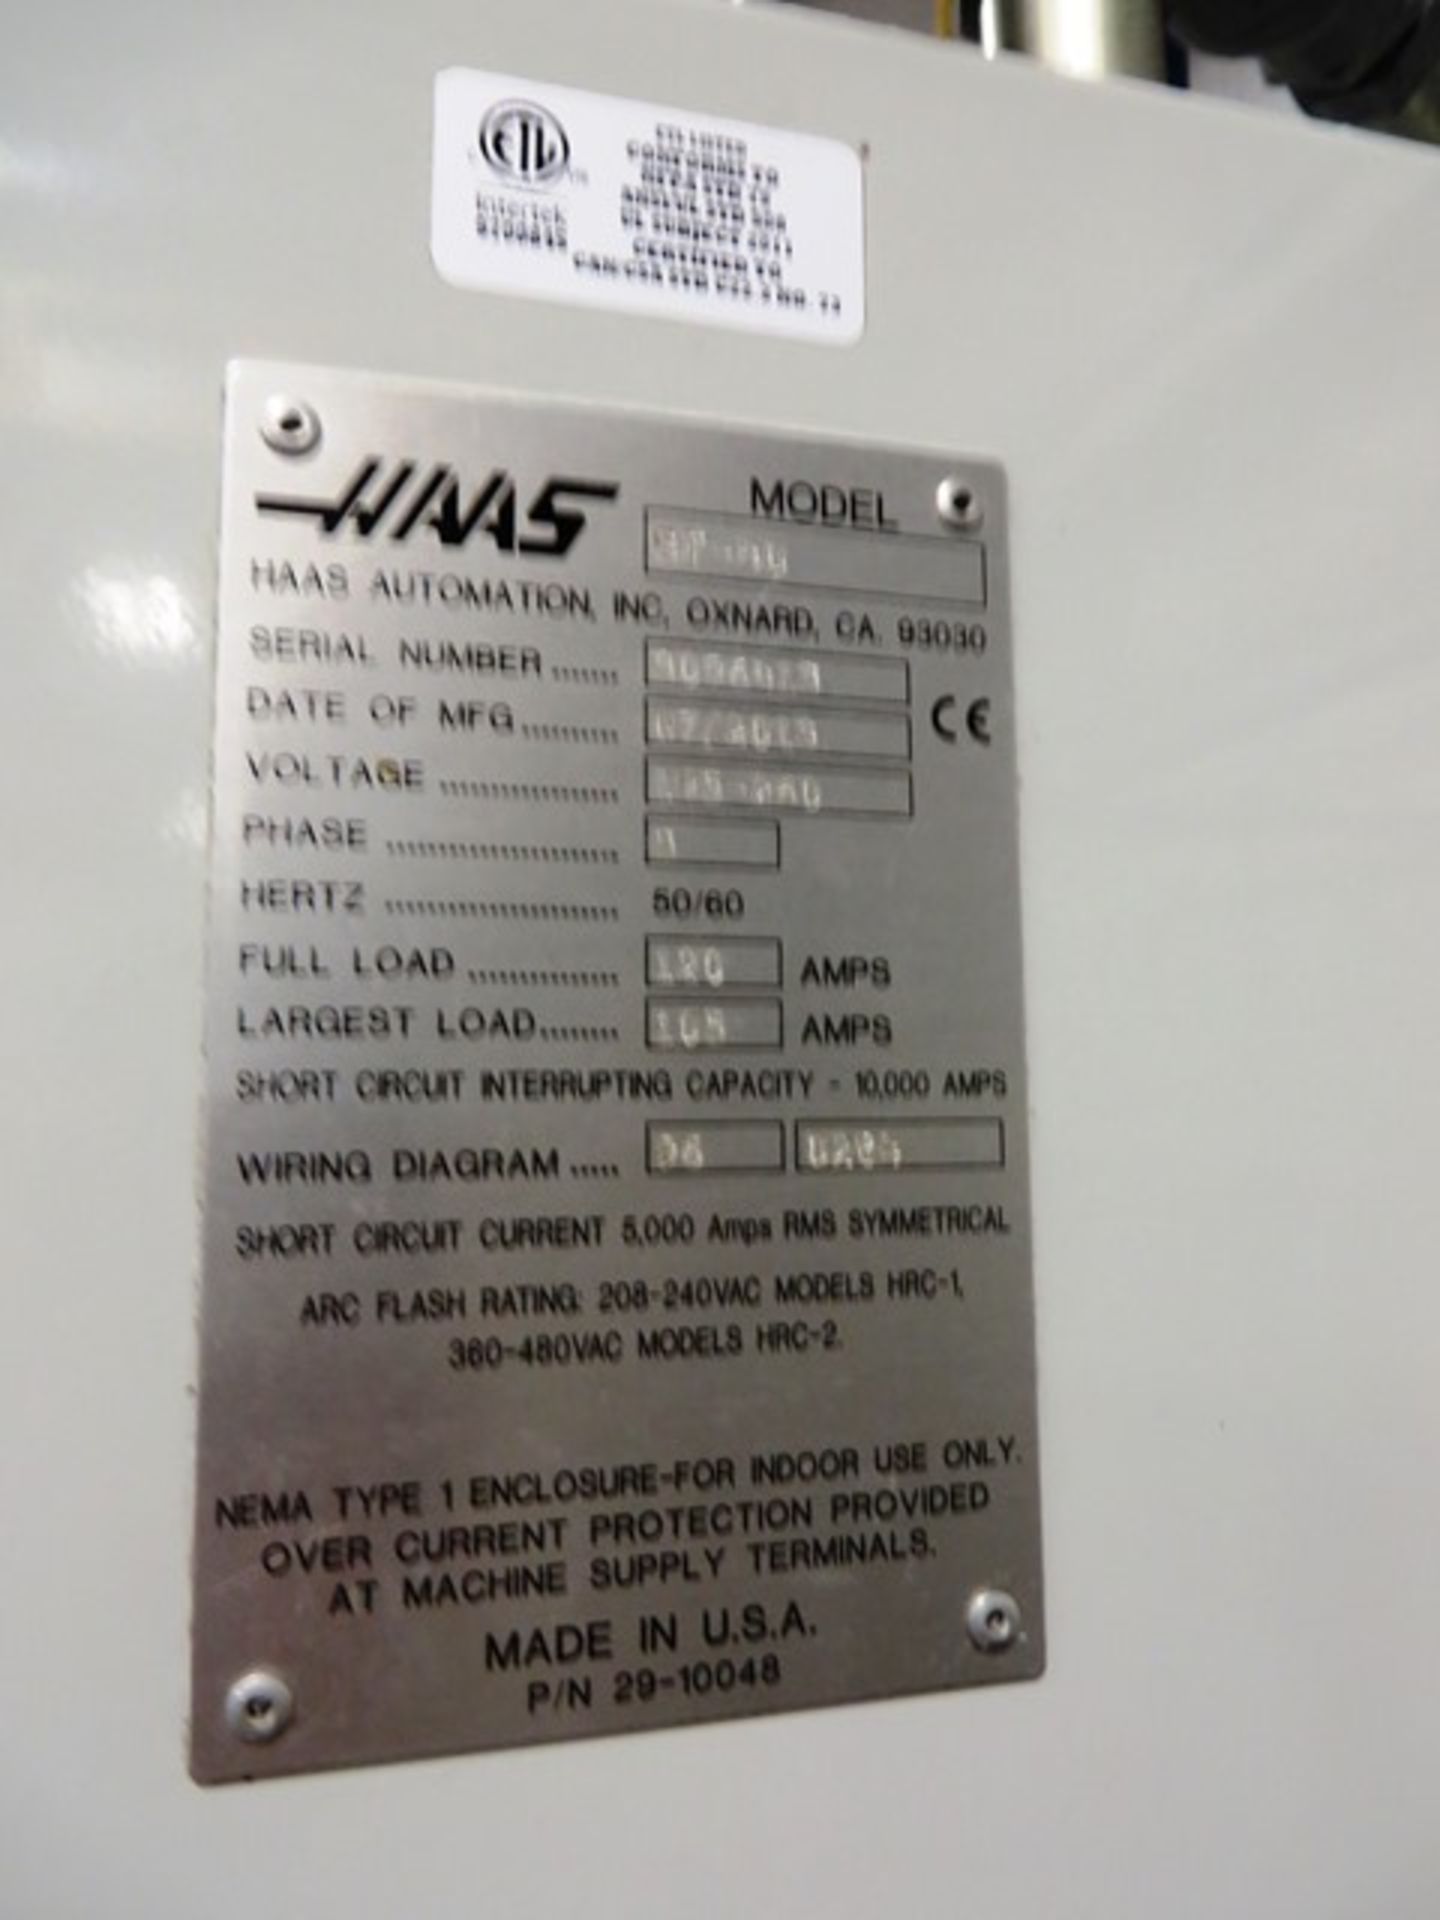 2013 Haas Model ST-40 CNC Turning Center - Image 6 of 6